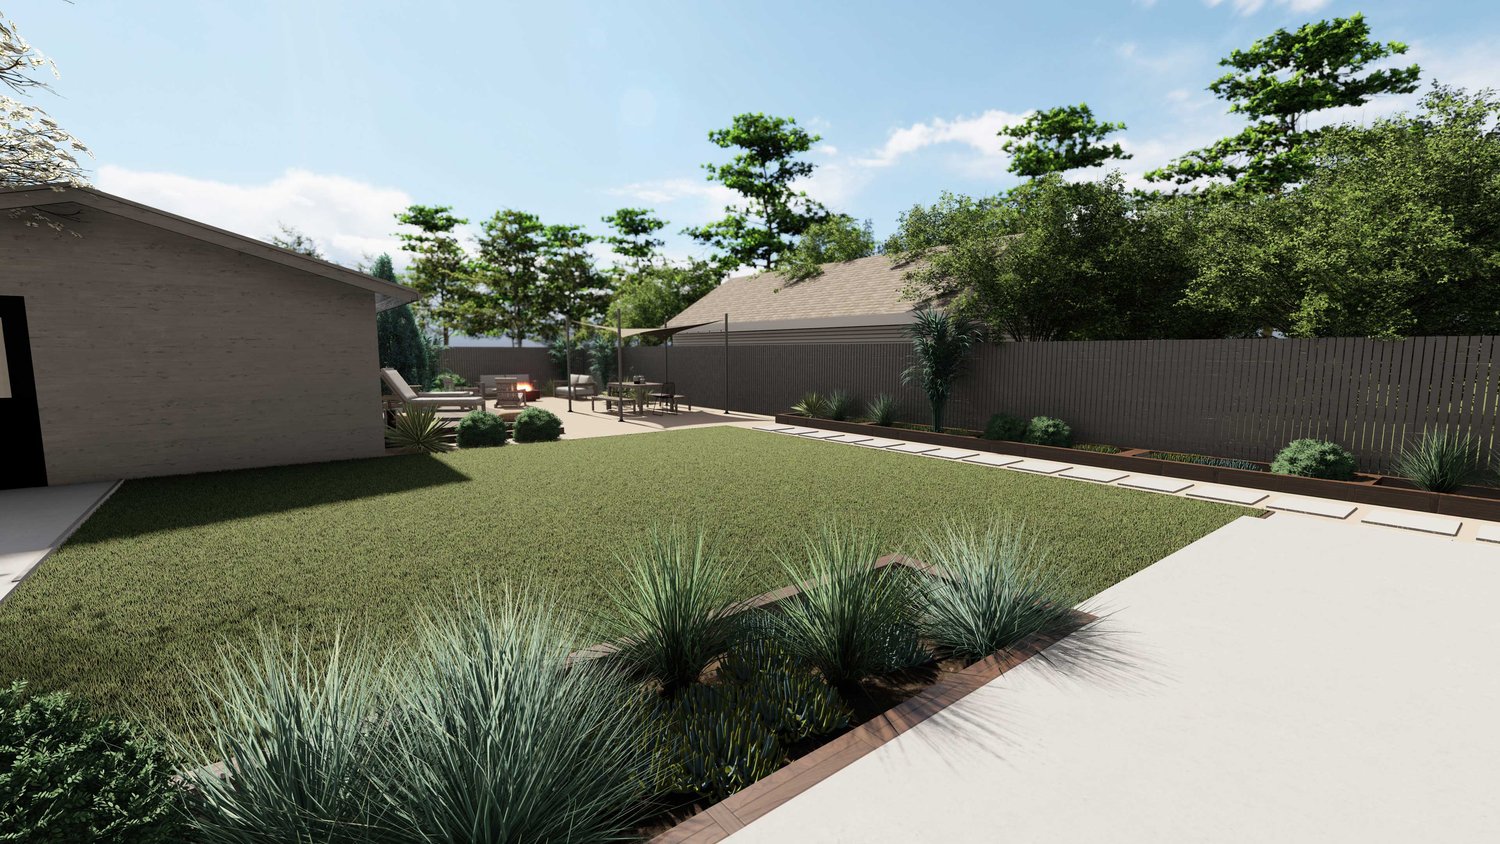 Park City front yard with lawn and plant bed, and concrete paver path leading to the backyard with seating areas